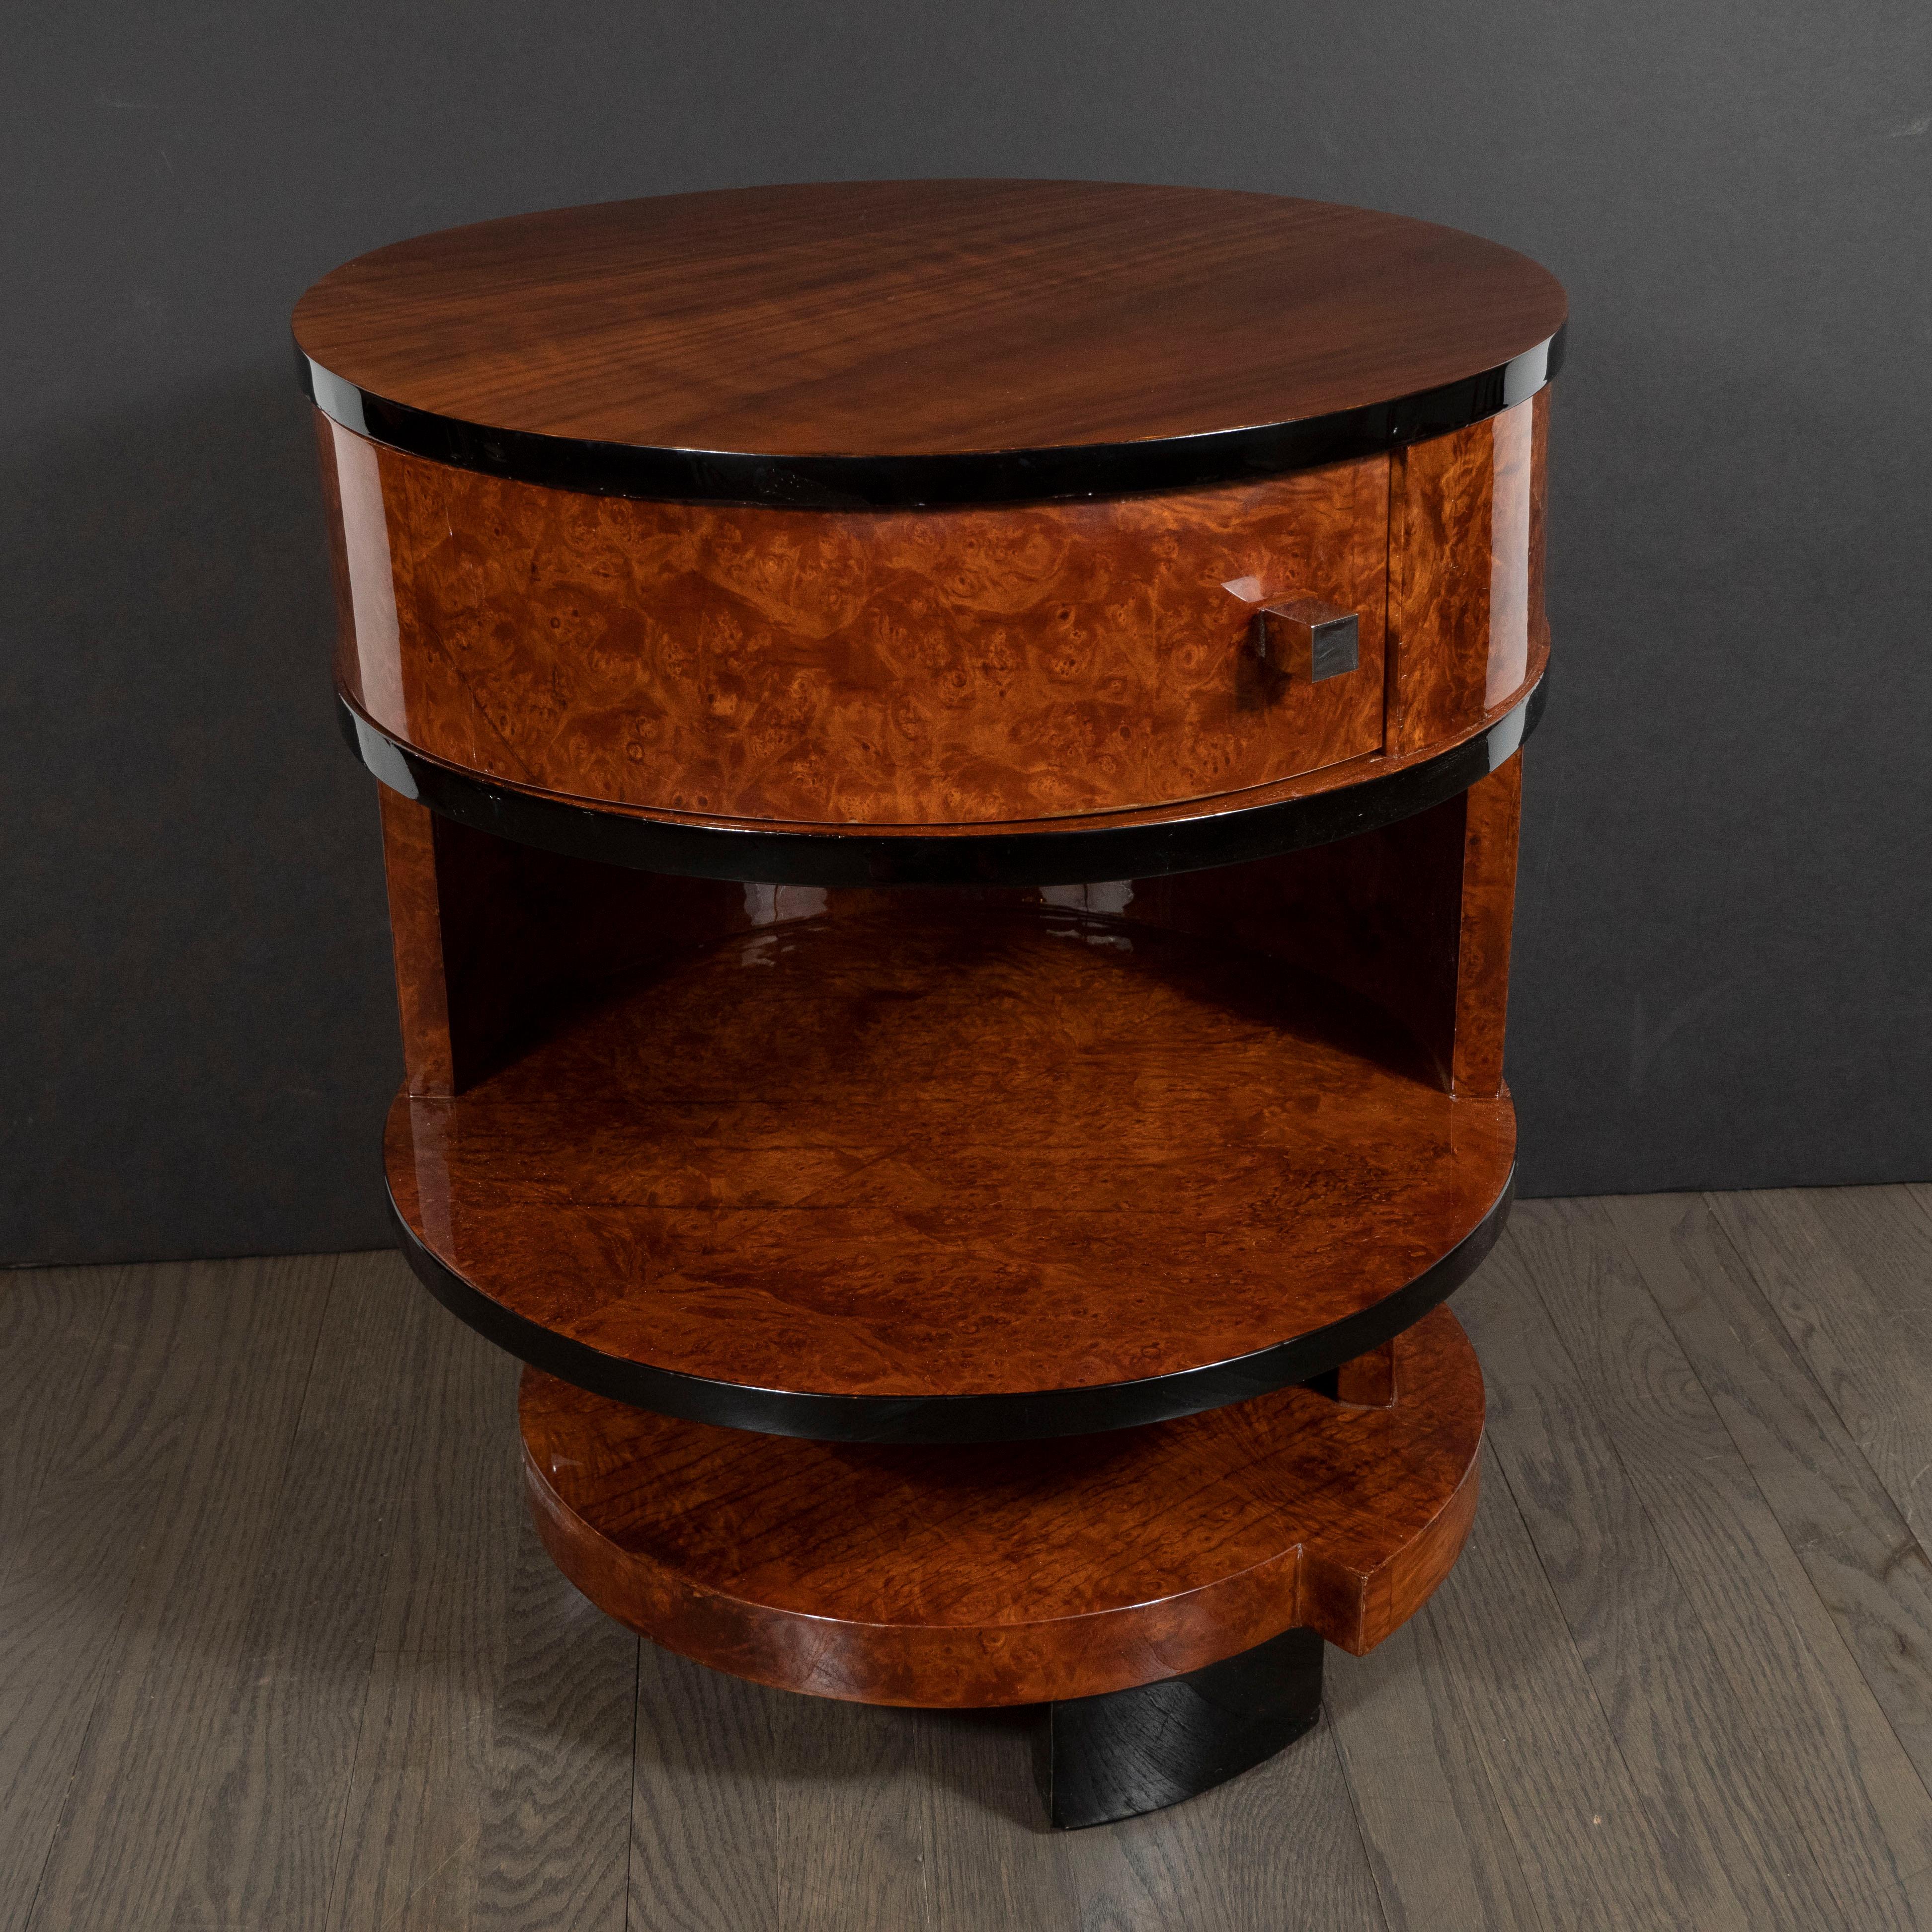 This elegant Art Deco Cubist side table was realized in France, circa 1935. It features a bookmatched walnut top circumscribed by black lacquer. There are two more black lacquer bands below, as well as two tiers offering a variety of storage